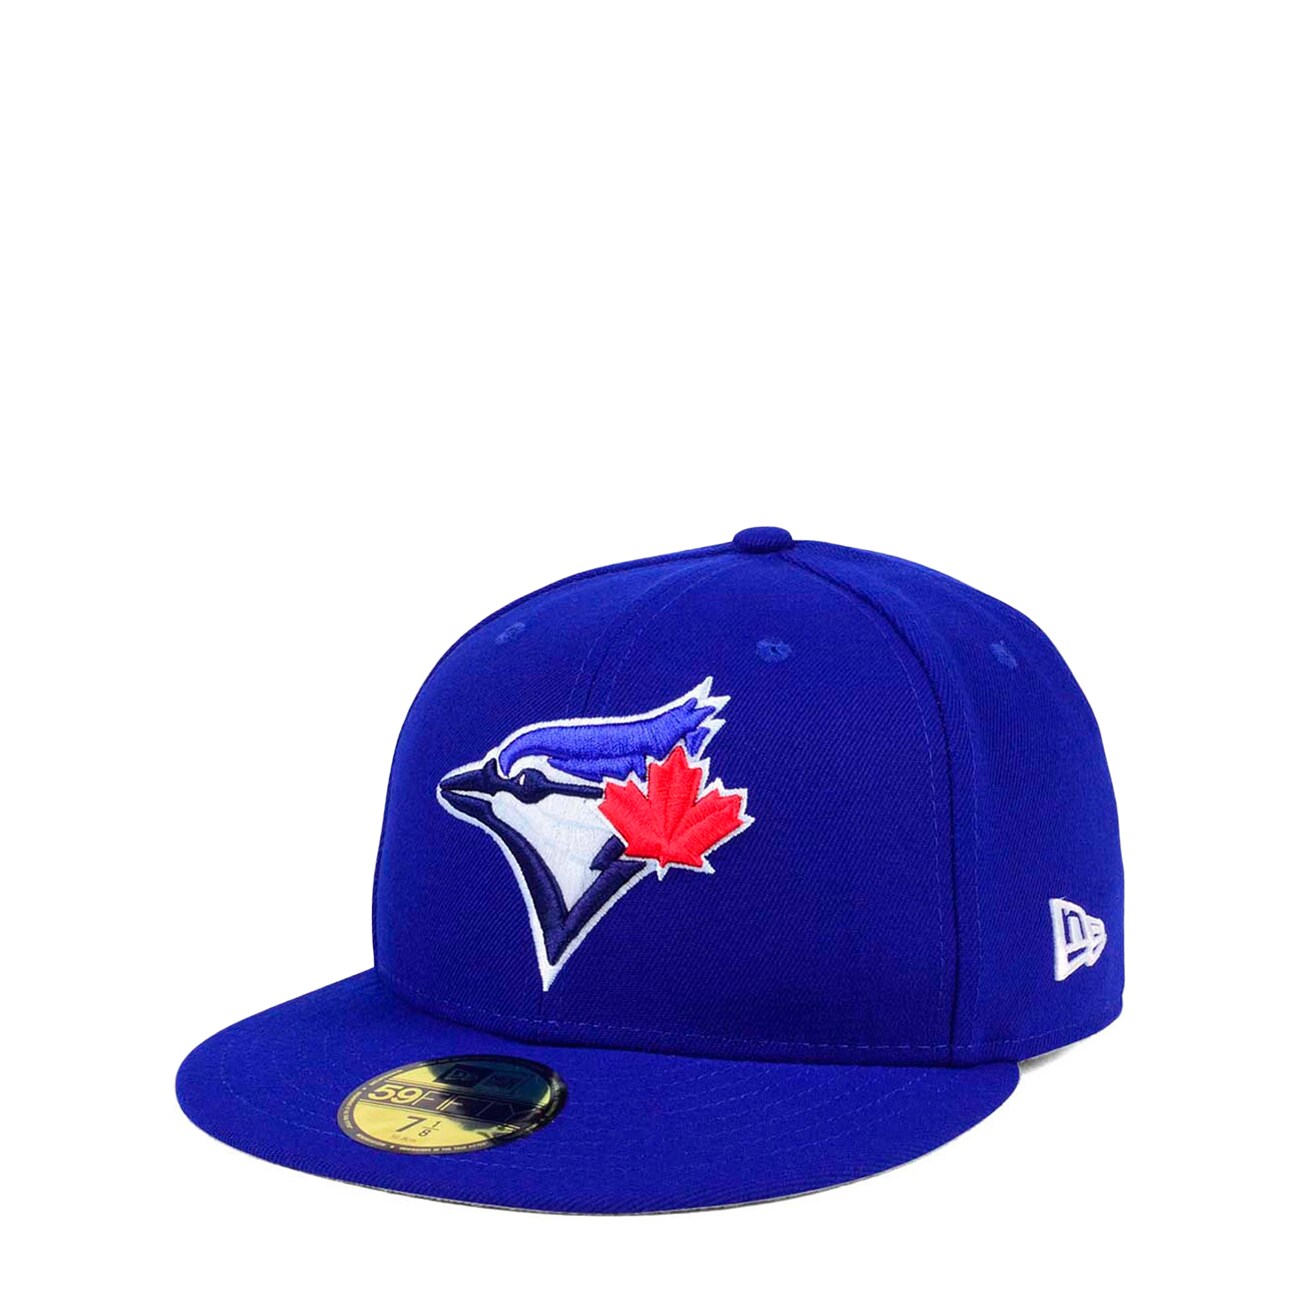 New Era Toronto Blue Jays Mlb Authentic Collection Game Fitted Cap